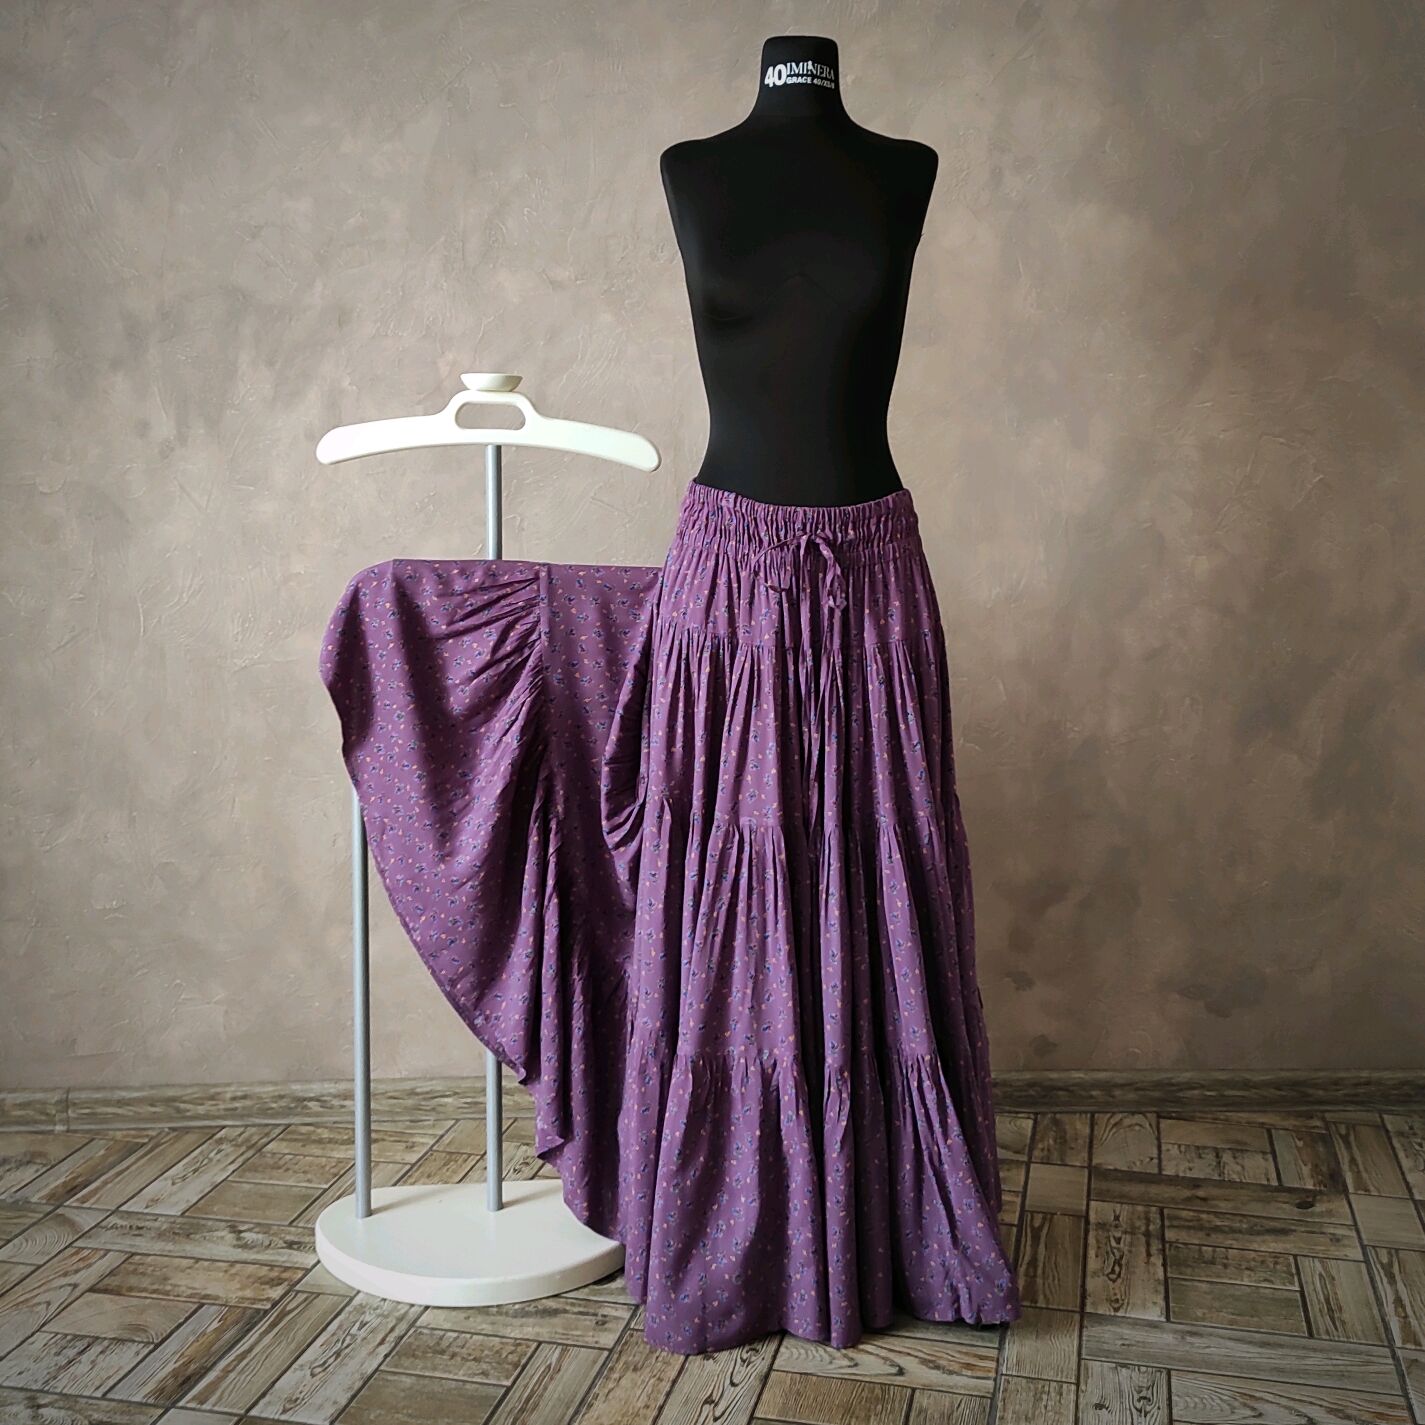 Tiered skirt from the 'Berry smoothie' staple', Skirts, Kemerovo,  Фото №1